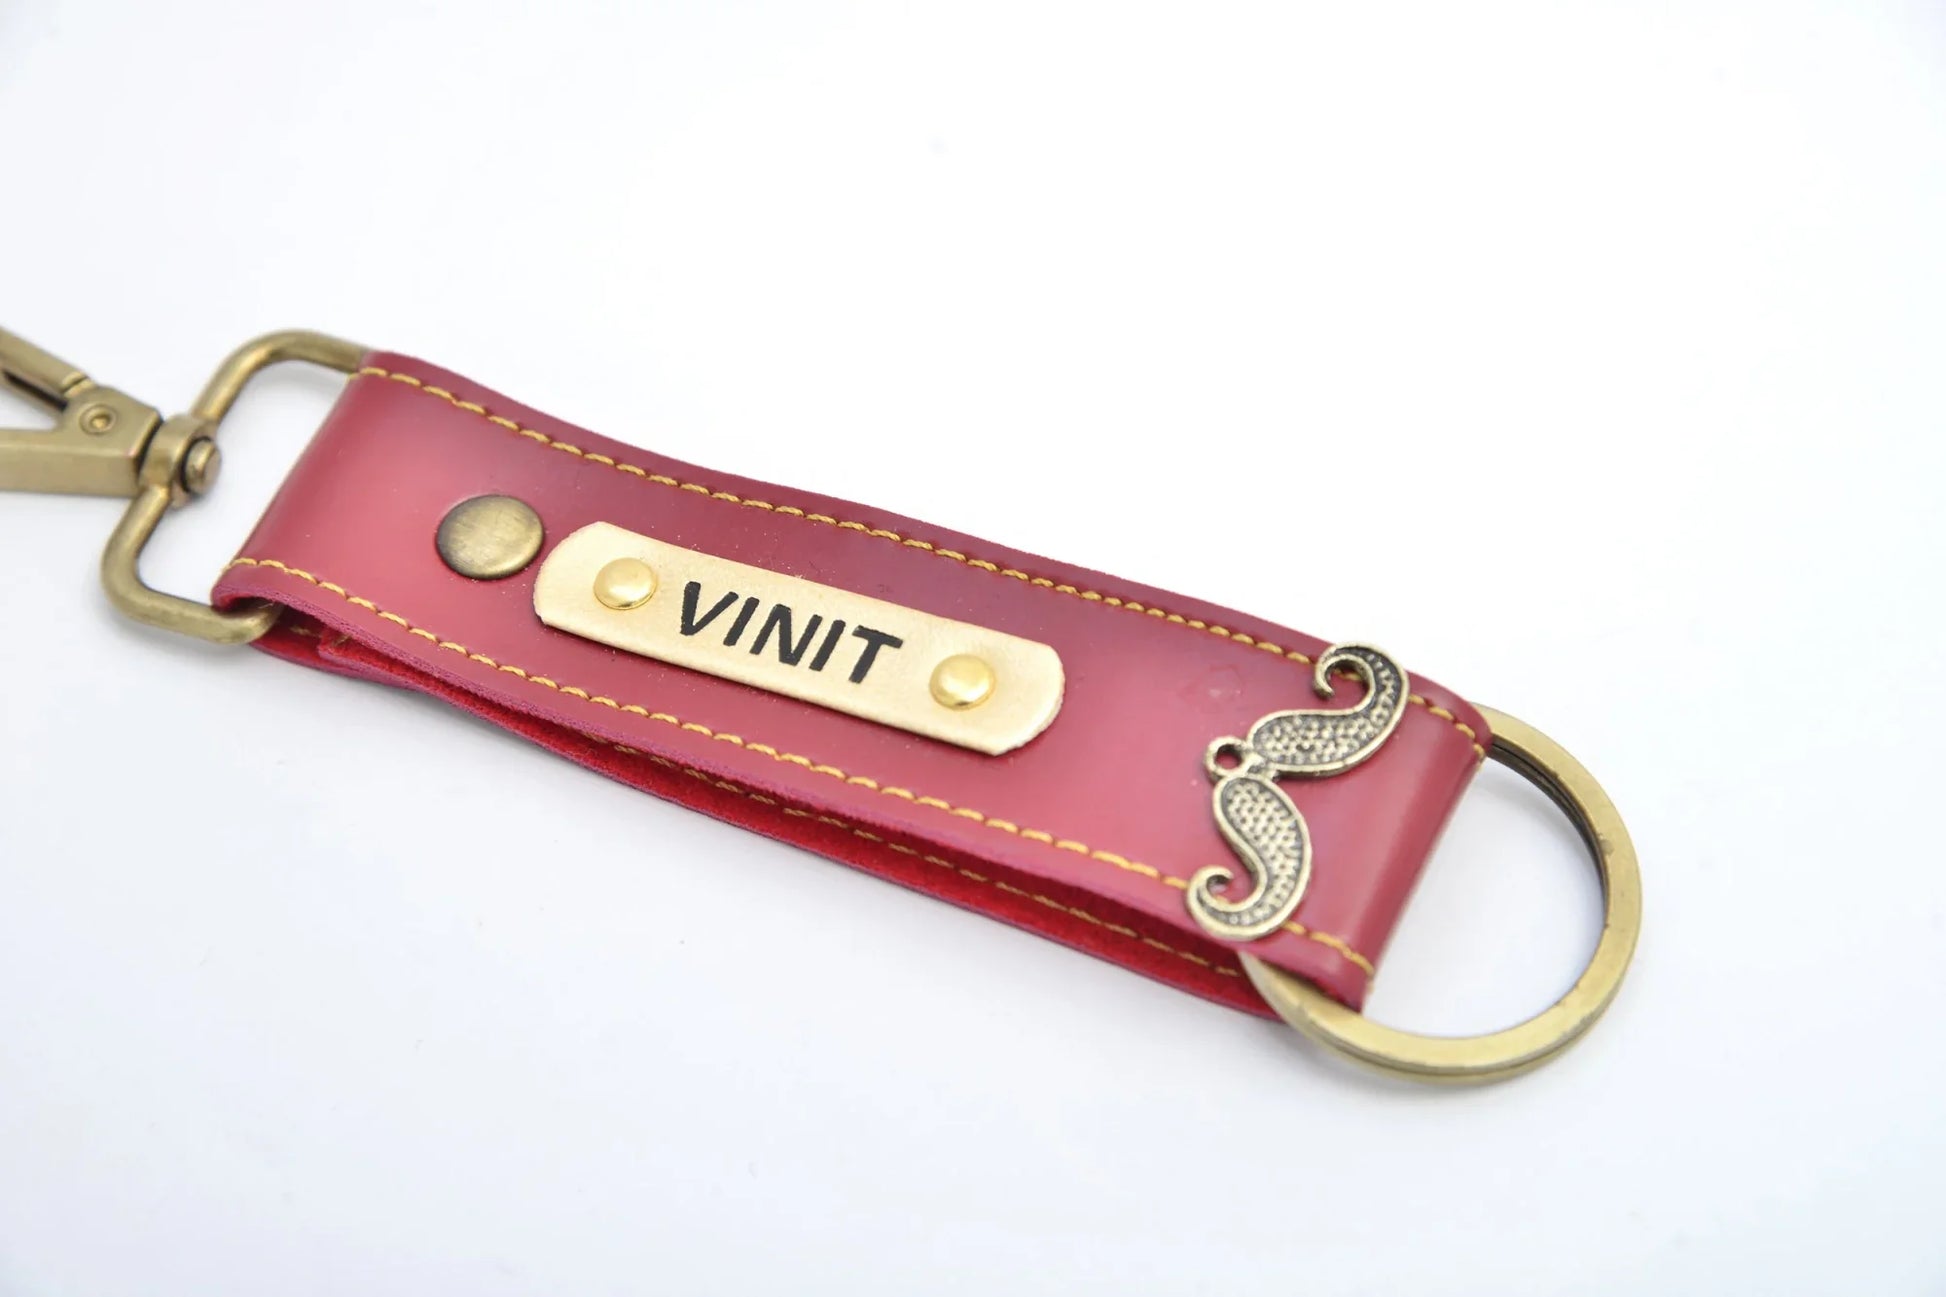  Don’t forget the flawless finish of this customized leather Keychain which is bound to leave you mesmerized. The best part is that faux leather is very durable. It can withstand scratches and scrapes that would mar genuine leather. 